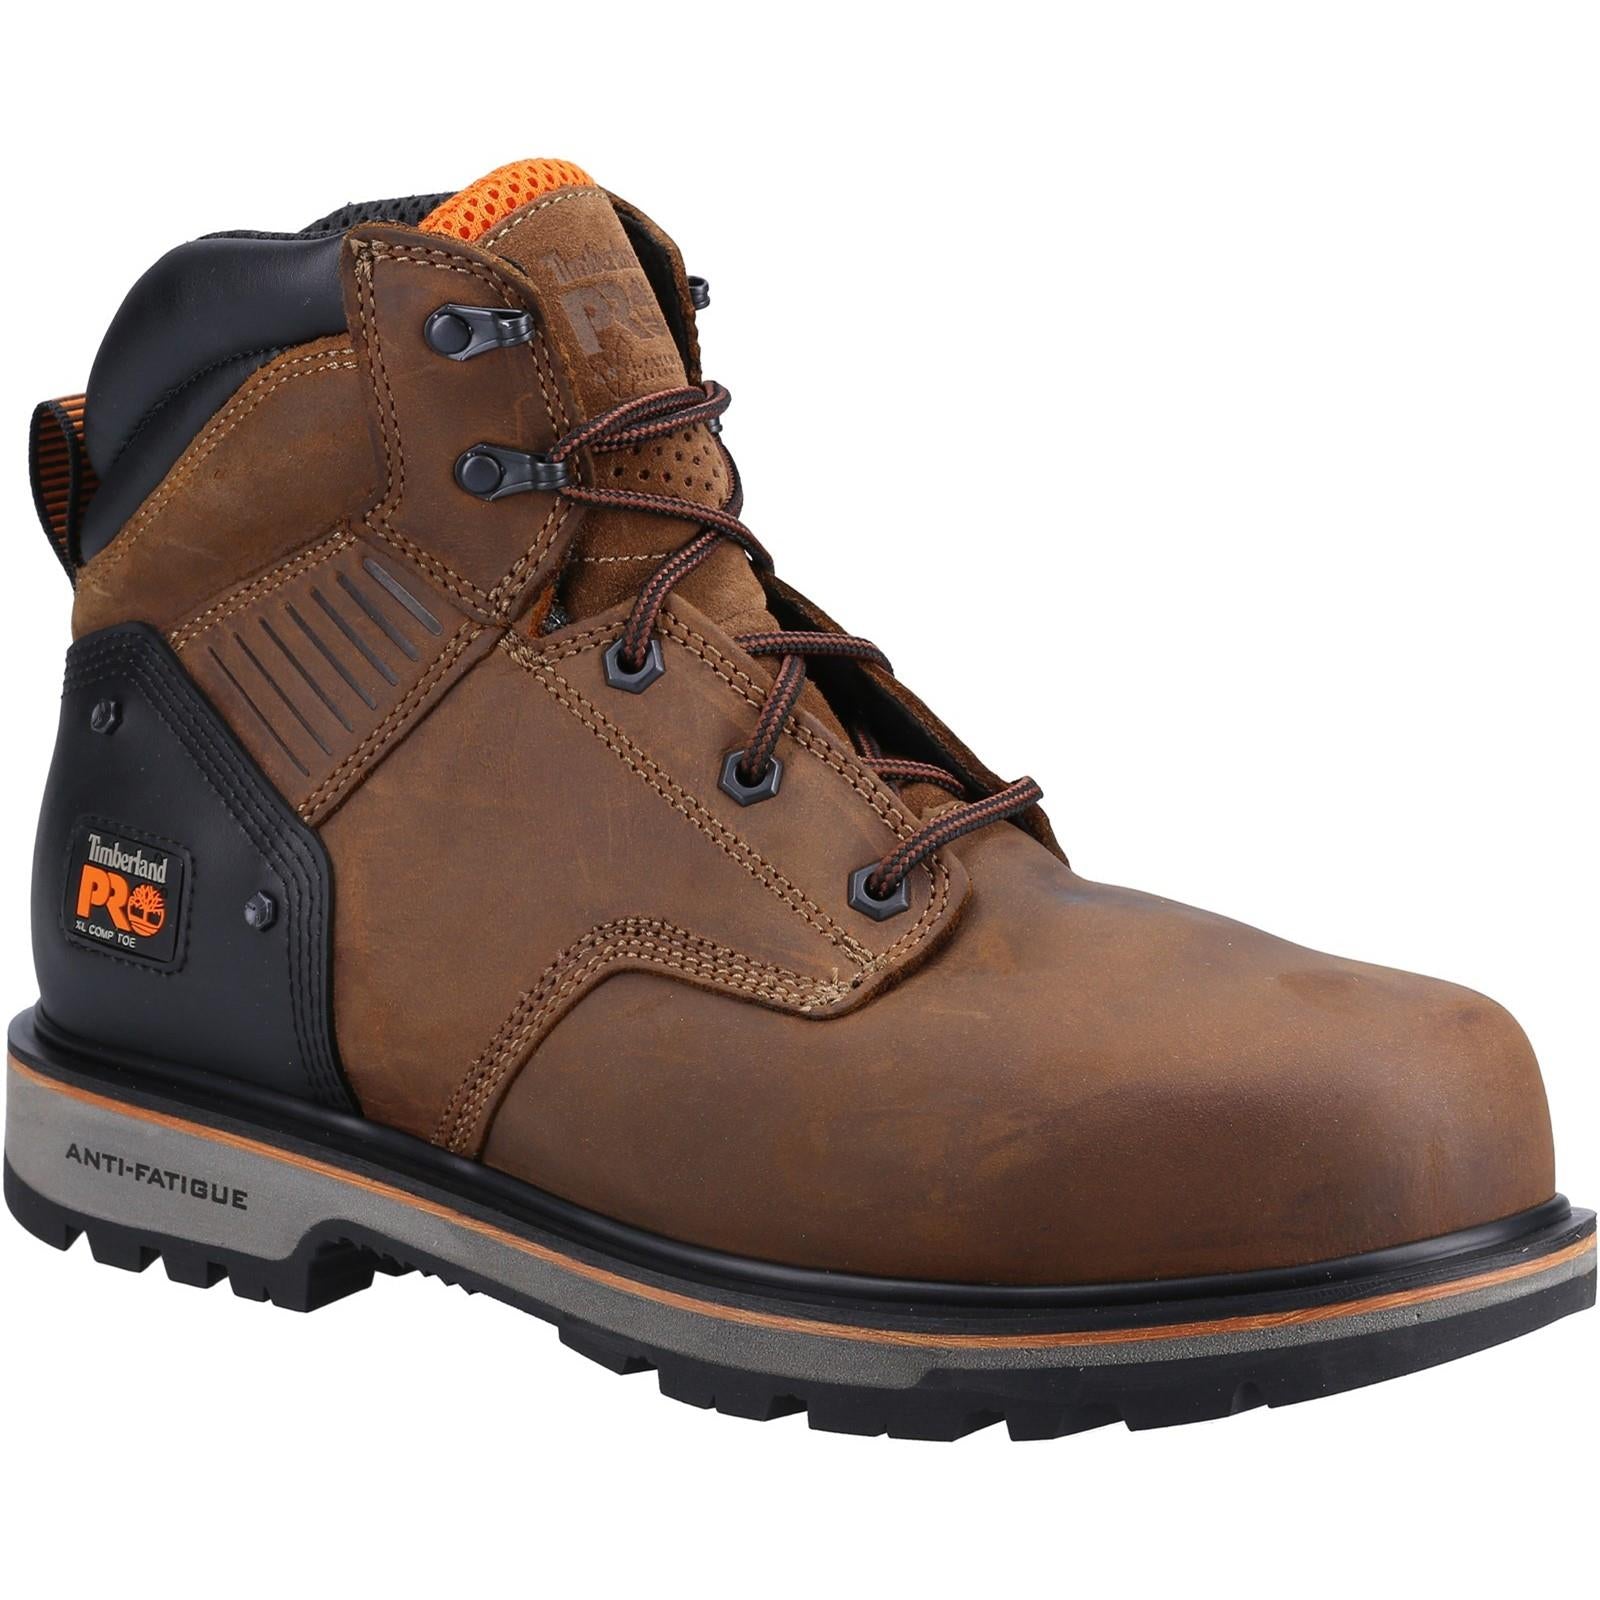 Timberland Pro Ballast S1P brown composite toe/midsole work safety boots